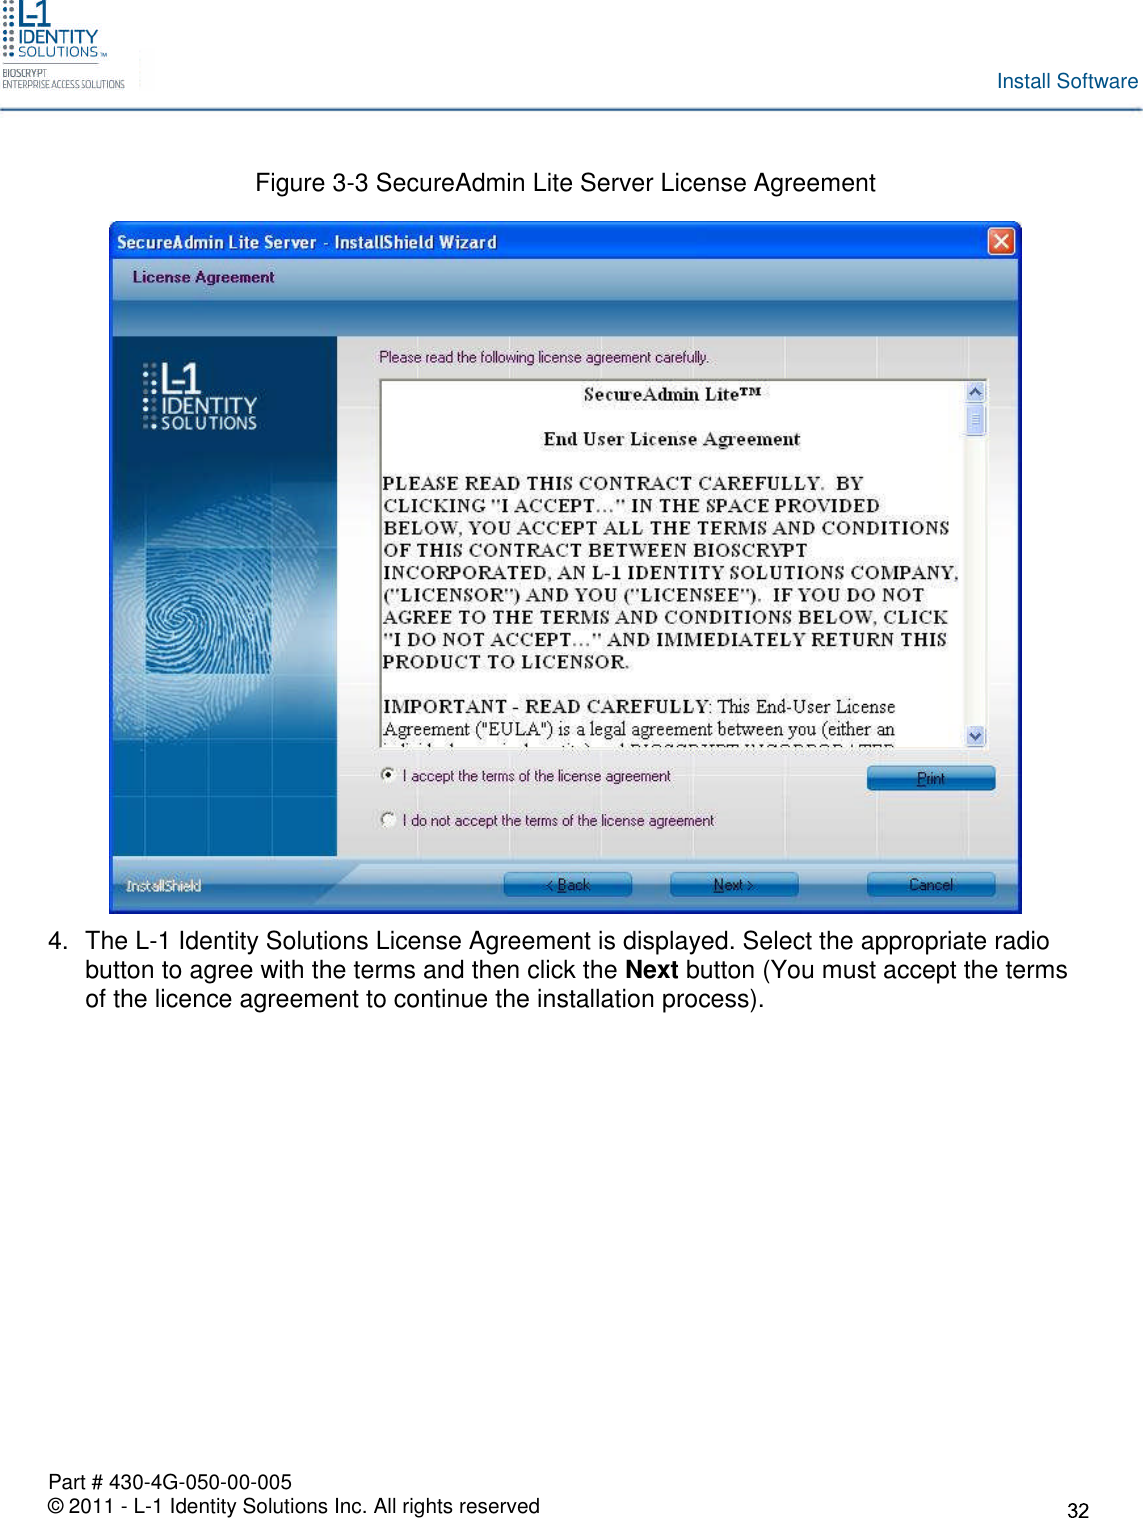 Part # 430-4G-050-00-005© 2011 - L-1 Identity Solutions Inc. All rights reservedInstall SoftwareFigure 3-3 SecureAdmin Lite Server License Agreement4. The L-1 Identity Solutions License Agreement is displayed. Select the appropriate radiobutton to agree with the terms and then click the Next button (You must accept the termsof the licence agreement to continue the installation process).